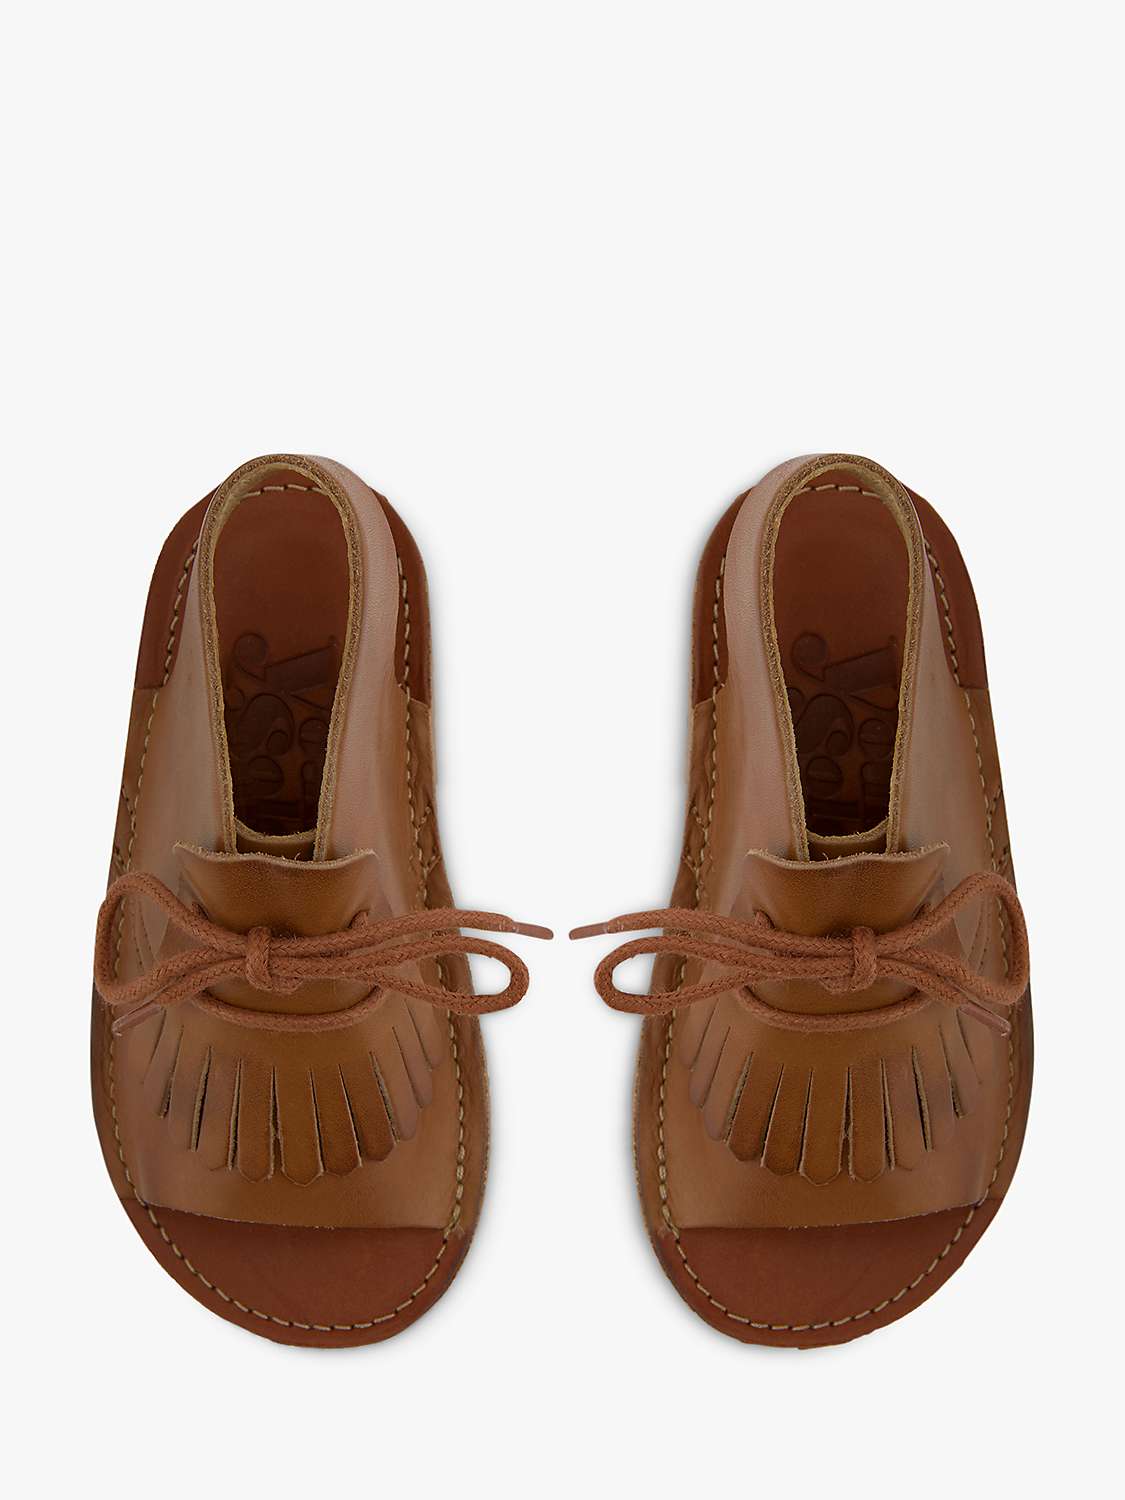 Buy Young Soles Kids' Leather Agnes Kilted Sandals, Tan Burnished Online at johnlewis.com